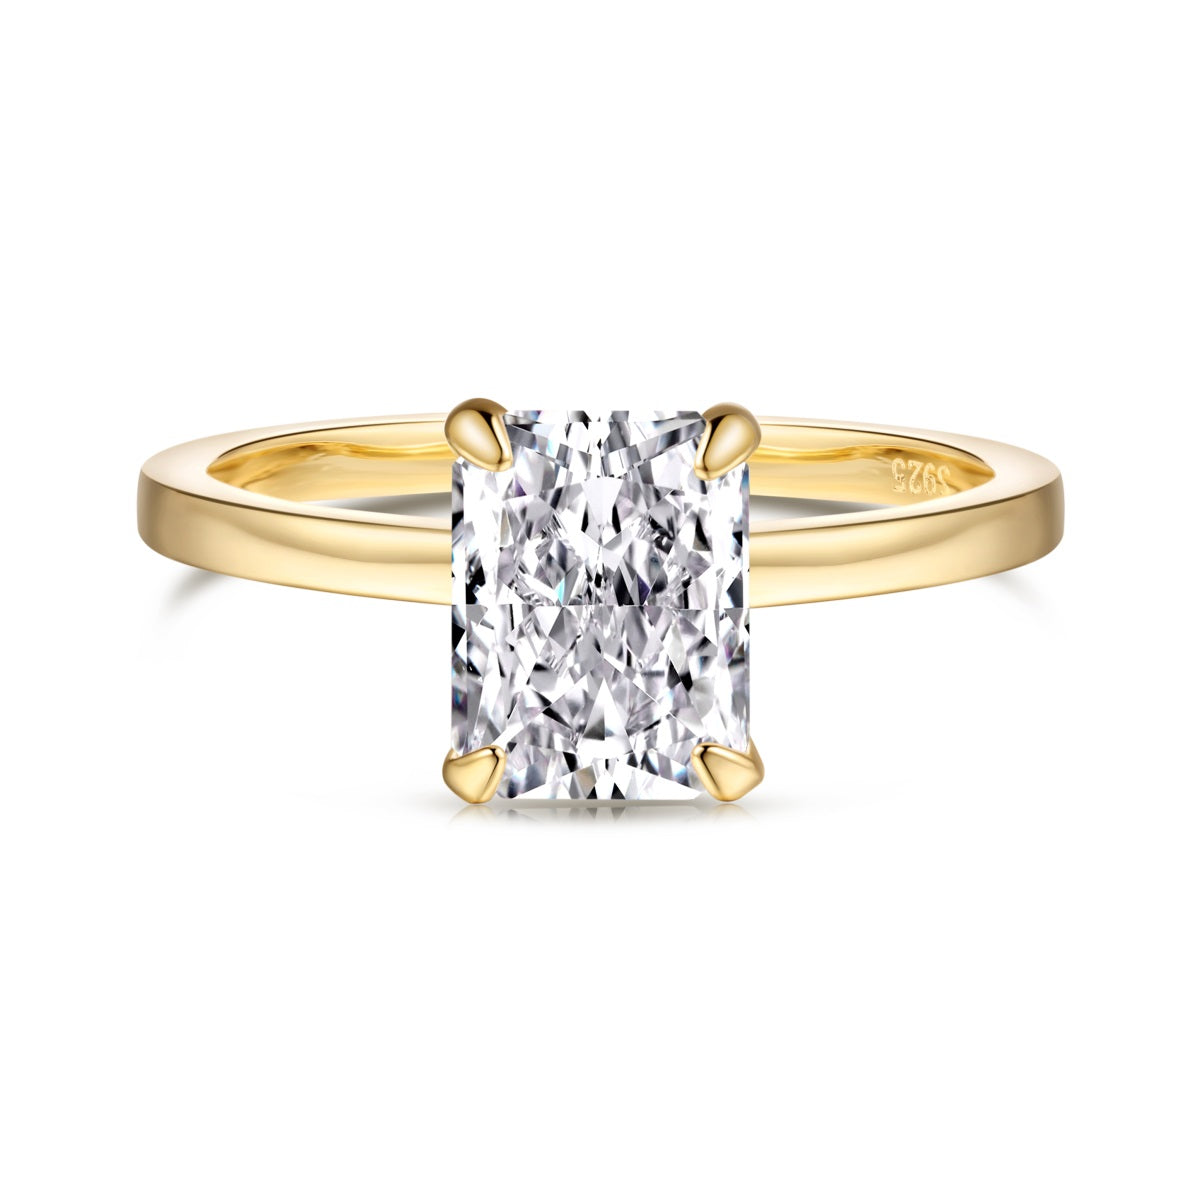 MONTE CARLO RING - GOLD SOLITAIRE